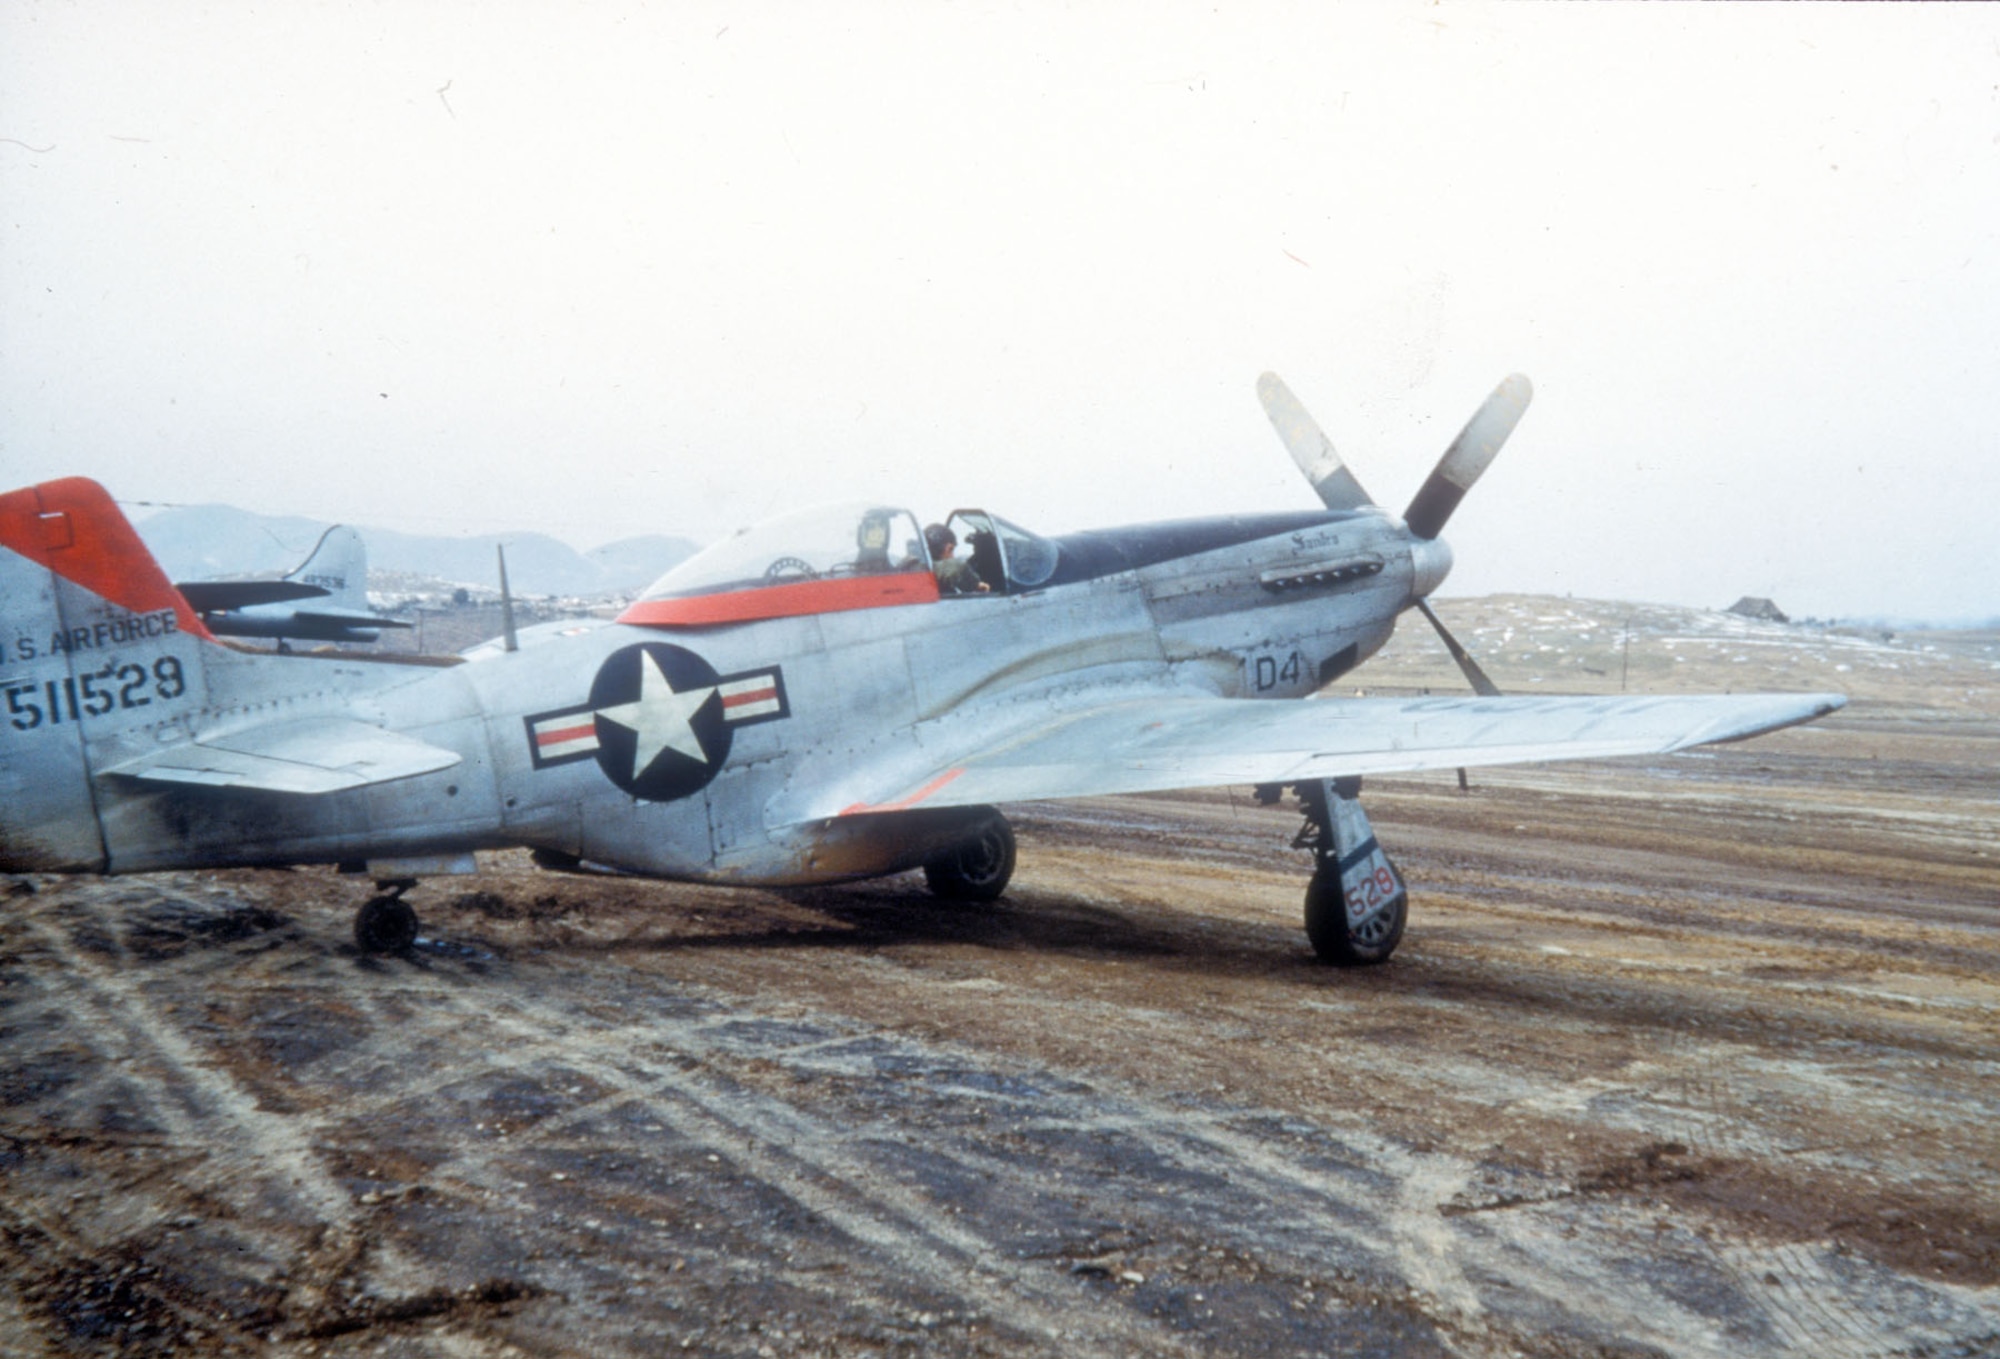 The World War II-era F-51D initially fought the North Korean Air Force, but it was primarily used as a ground attack aircraft during the Korean War. (U.S. Air Force photo)